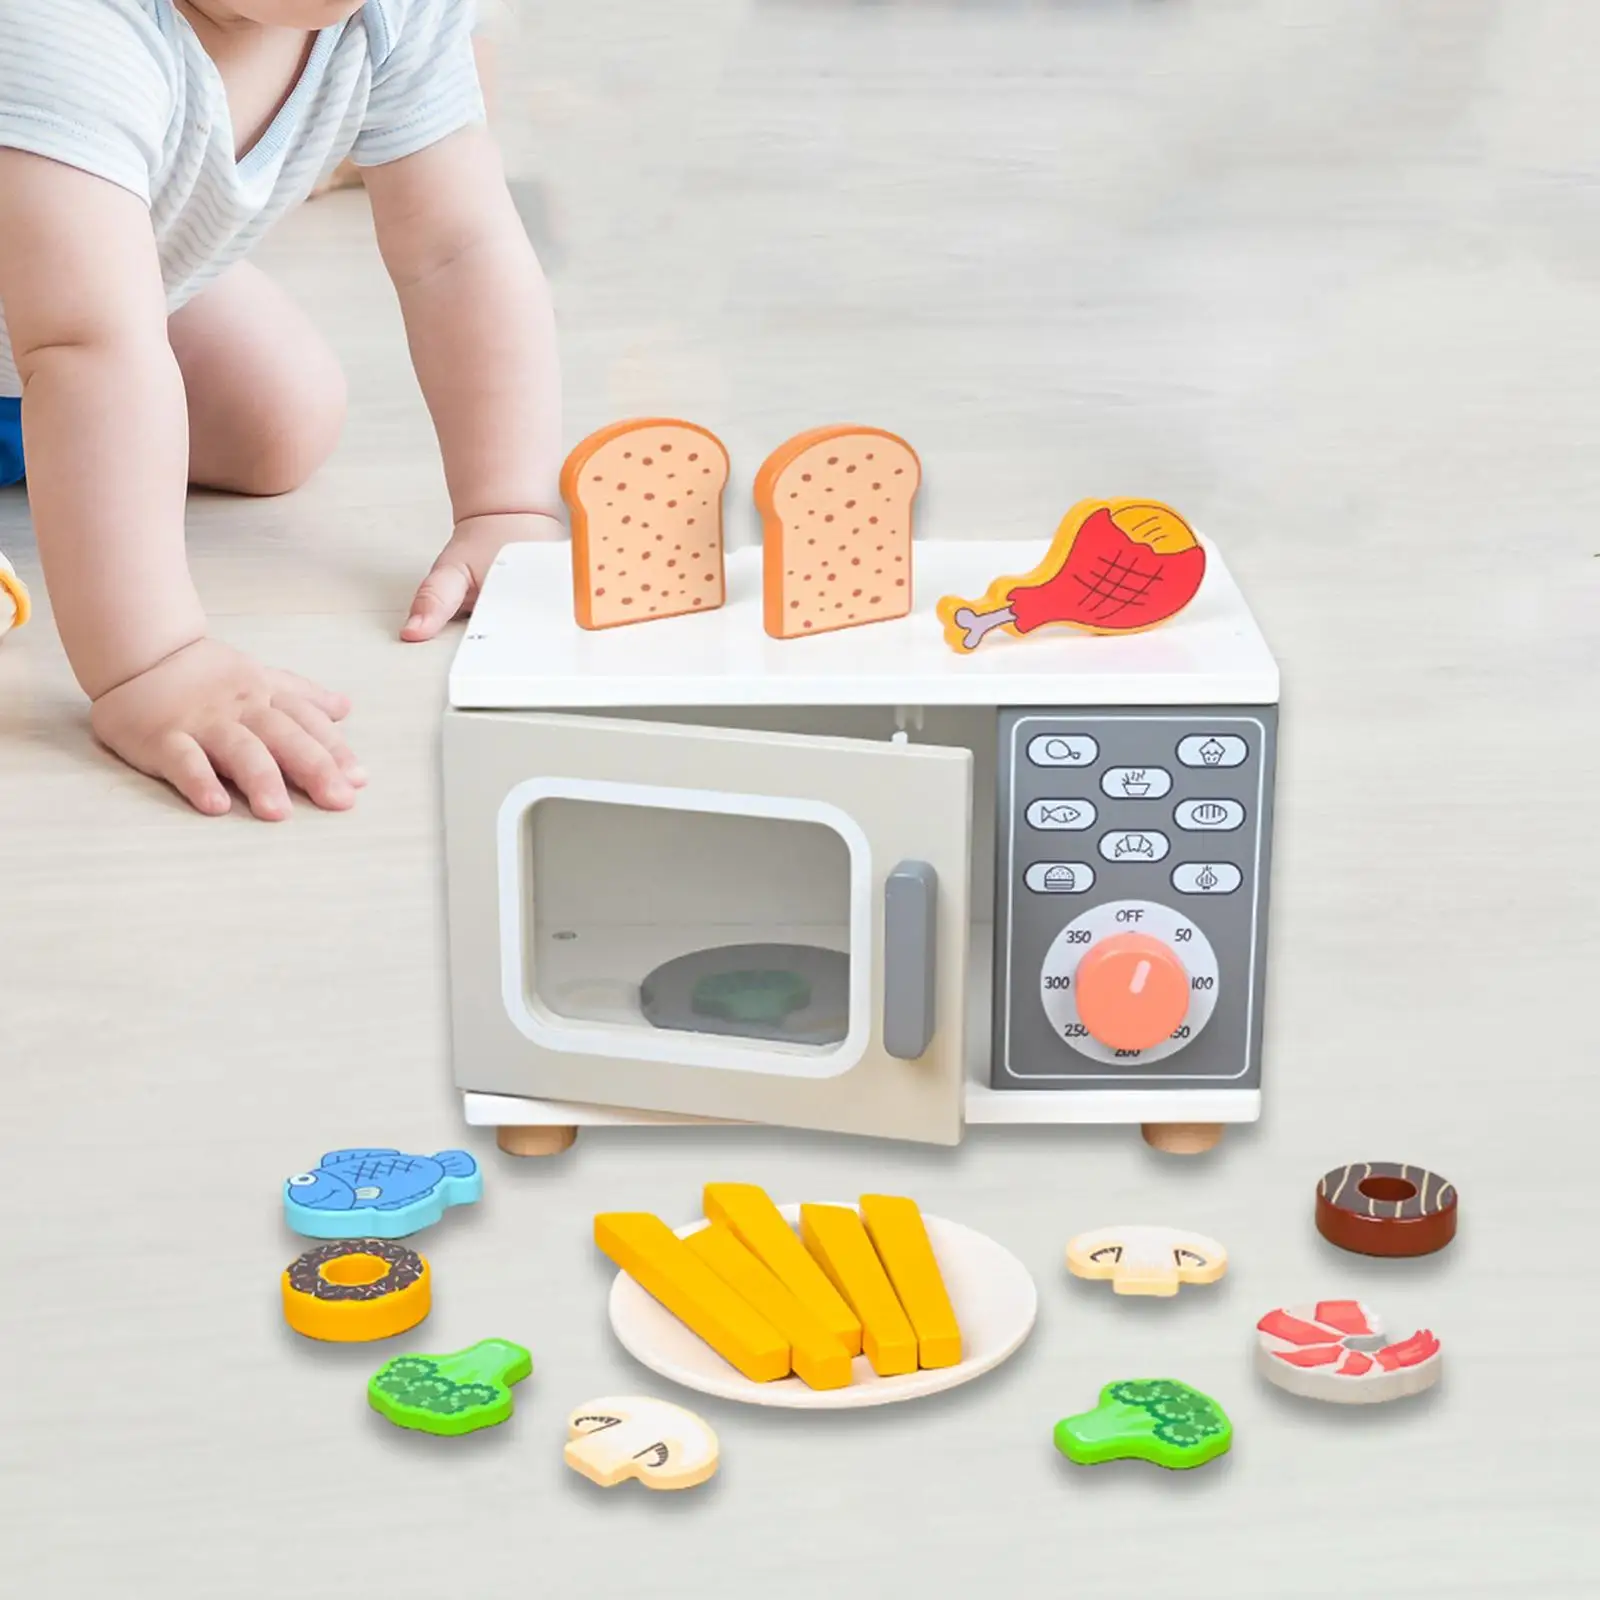 Kids Microwave Toy Educational Toys Play Pretend Toys Realistic Toy Kitchen Appliances for Girls Boys Kids Children 3-8 Year Old